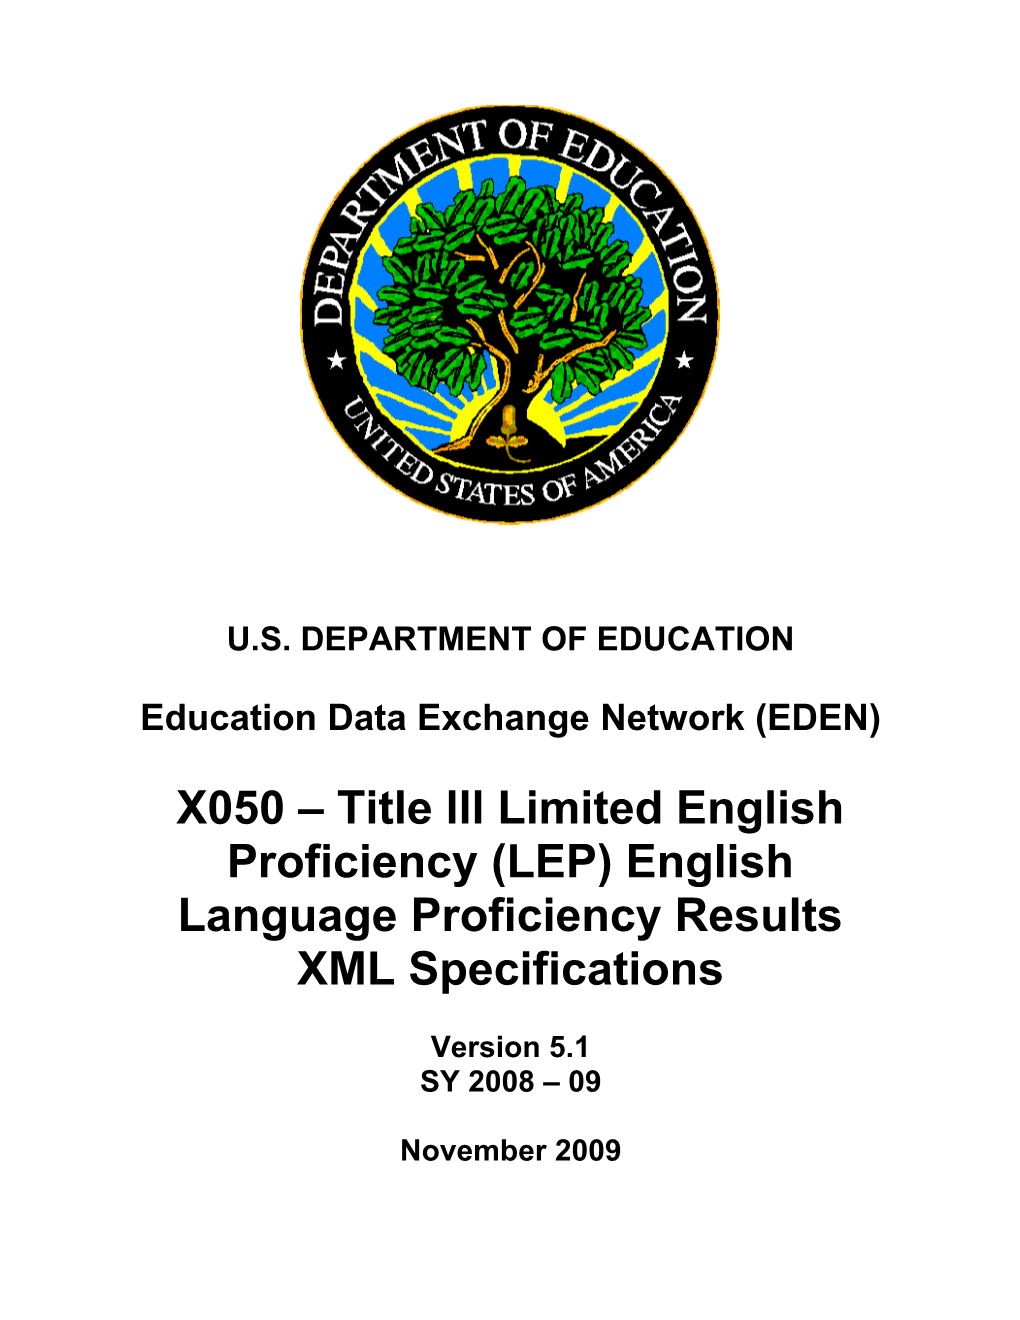 Title III LEP English Language Proficiency Results XML Specifications